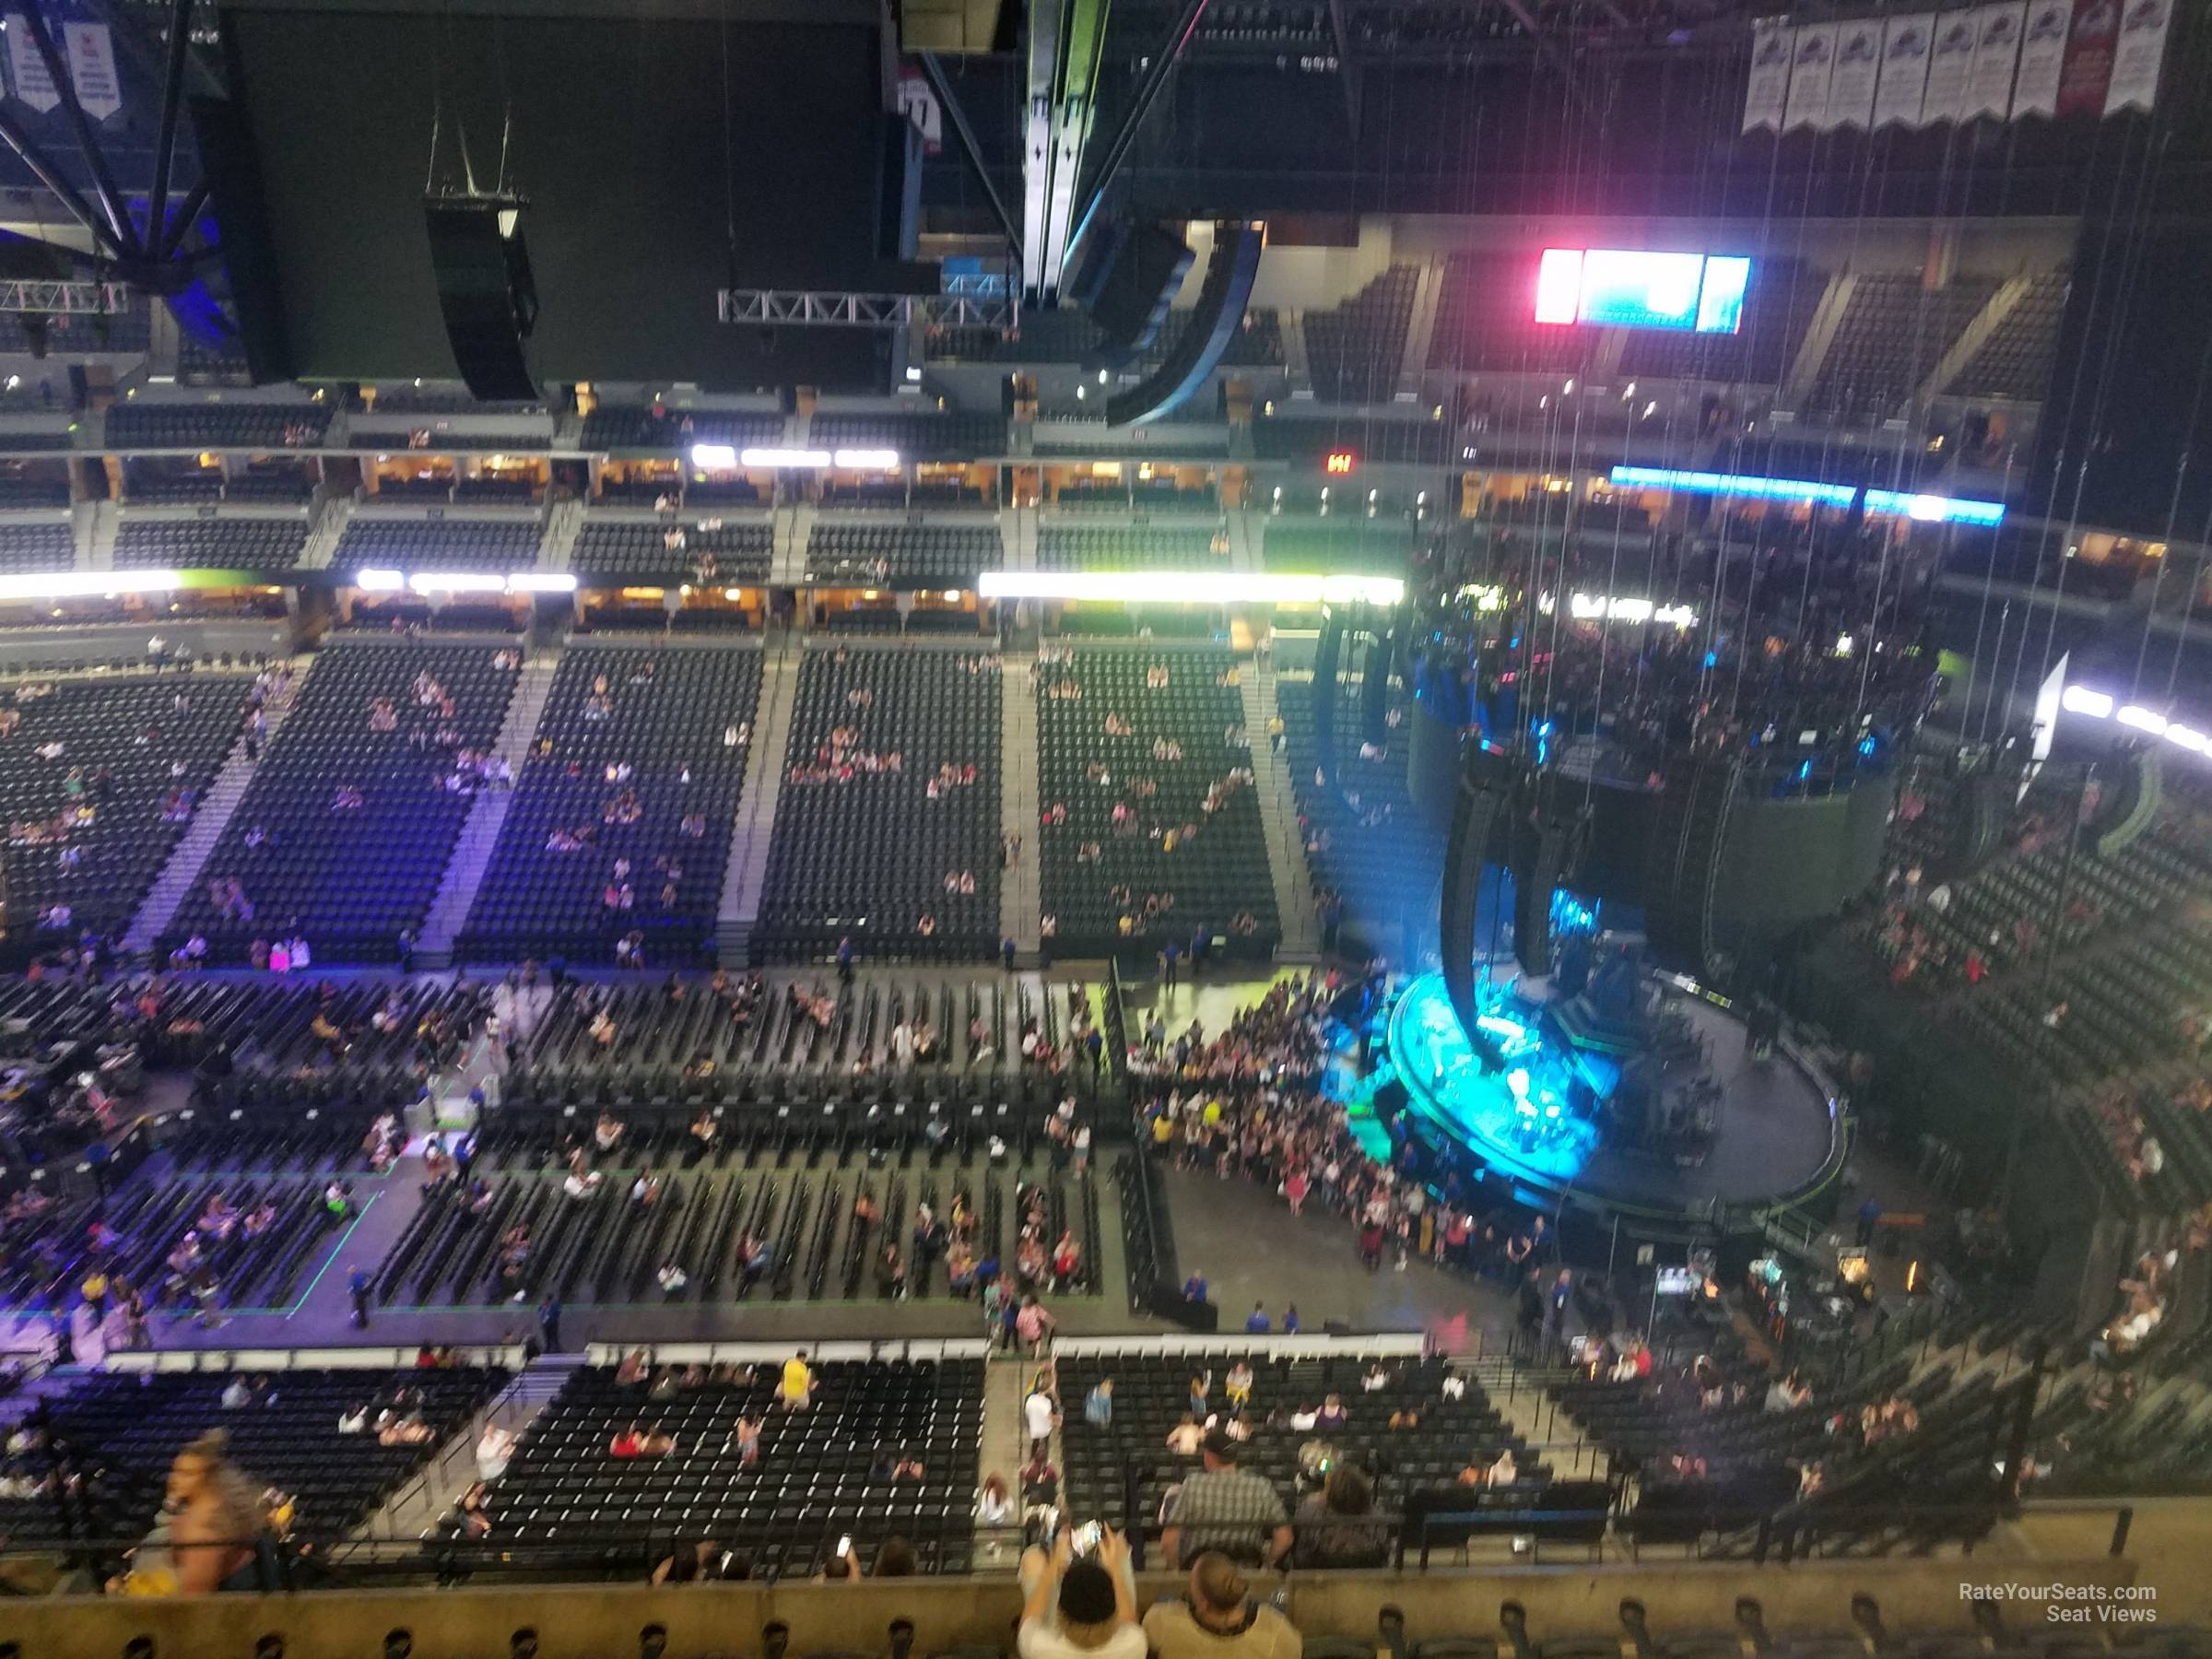 section 380, row 13 seat view  for concert - ball arena